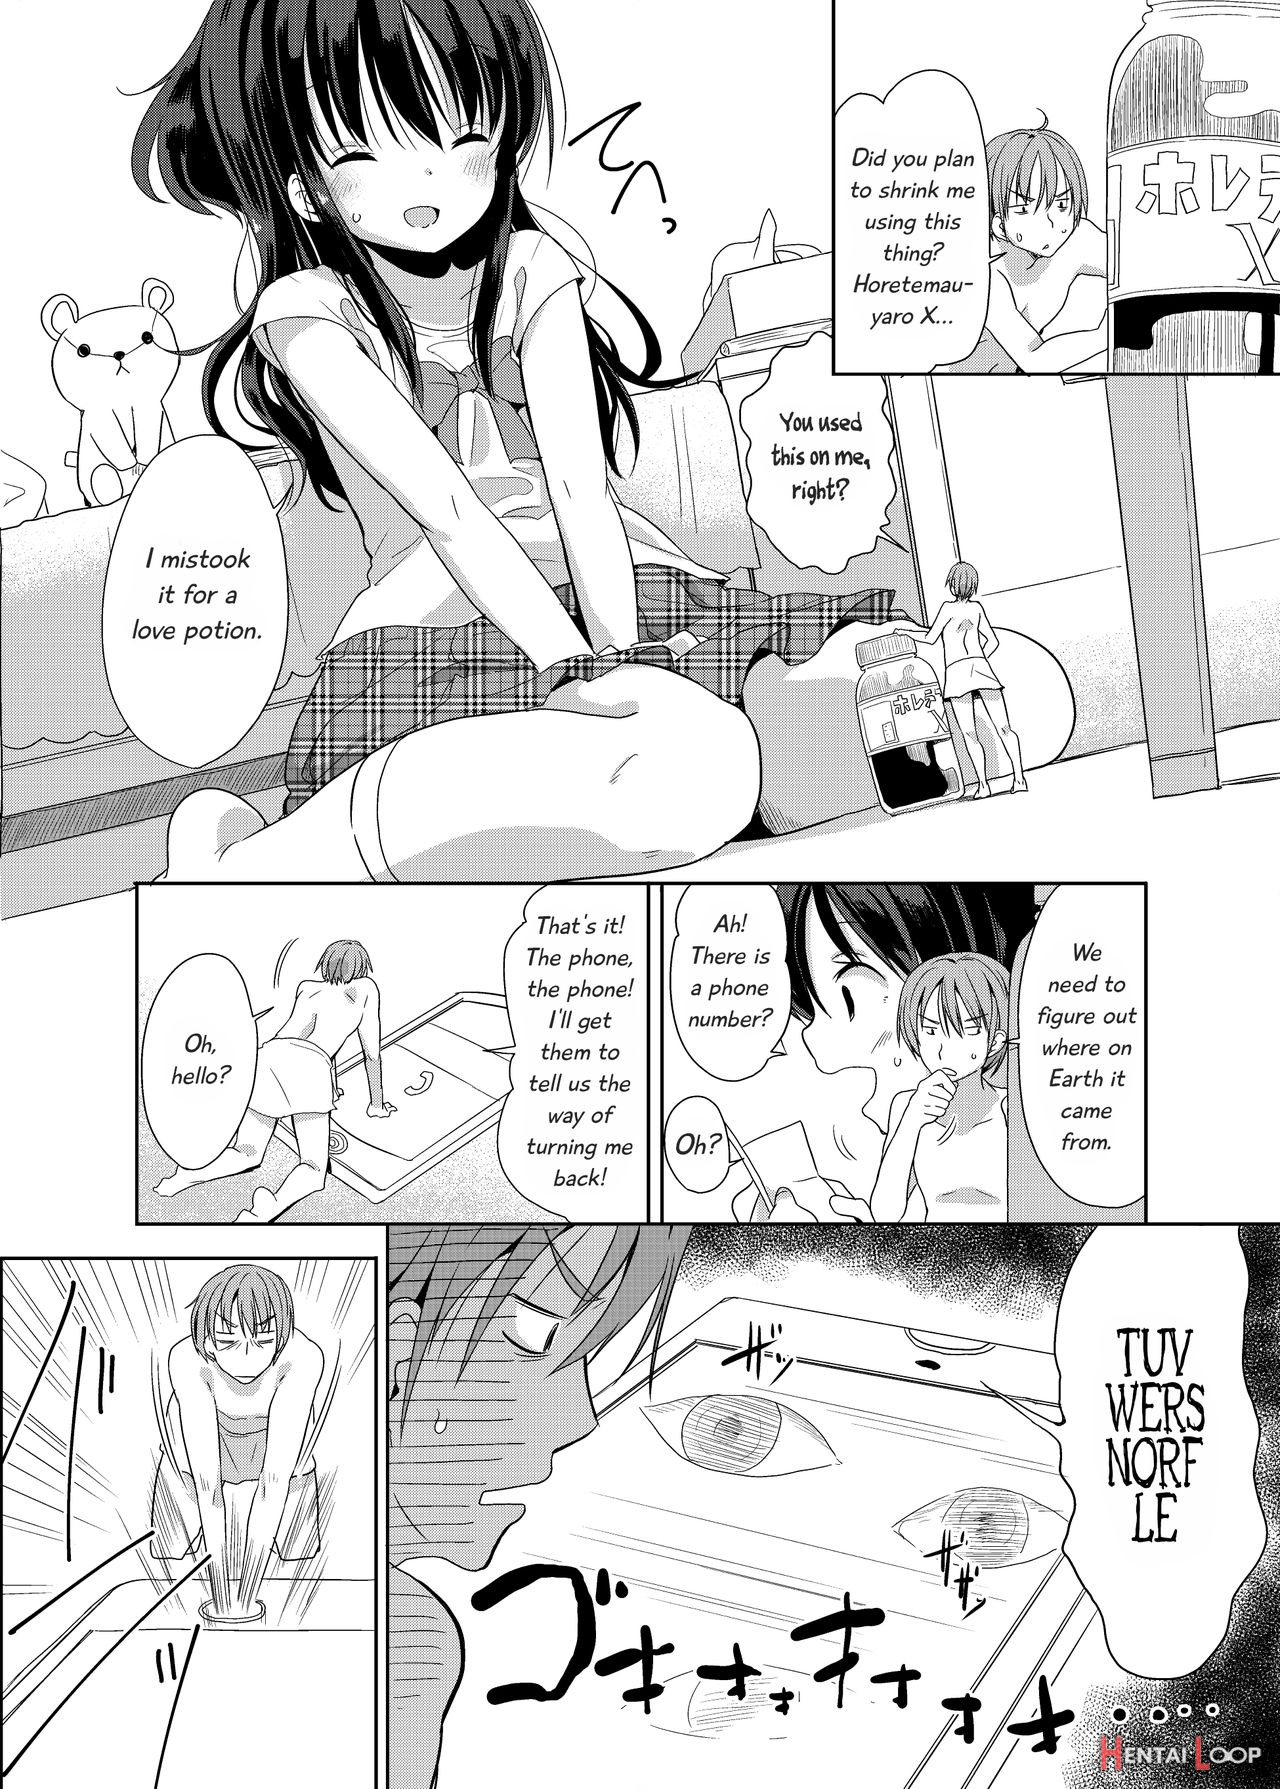 Little Sister With Grande Everyday – Decensored page 5